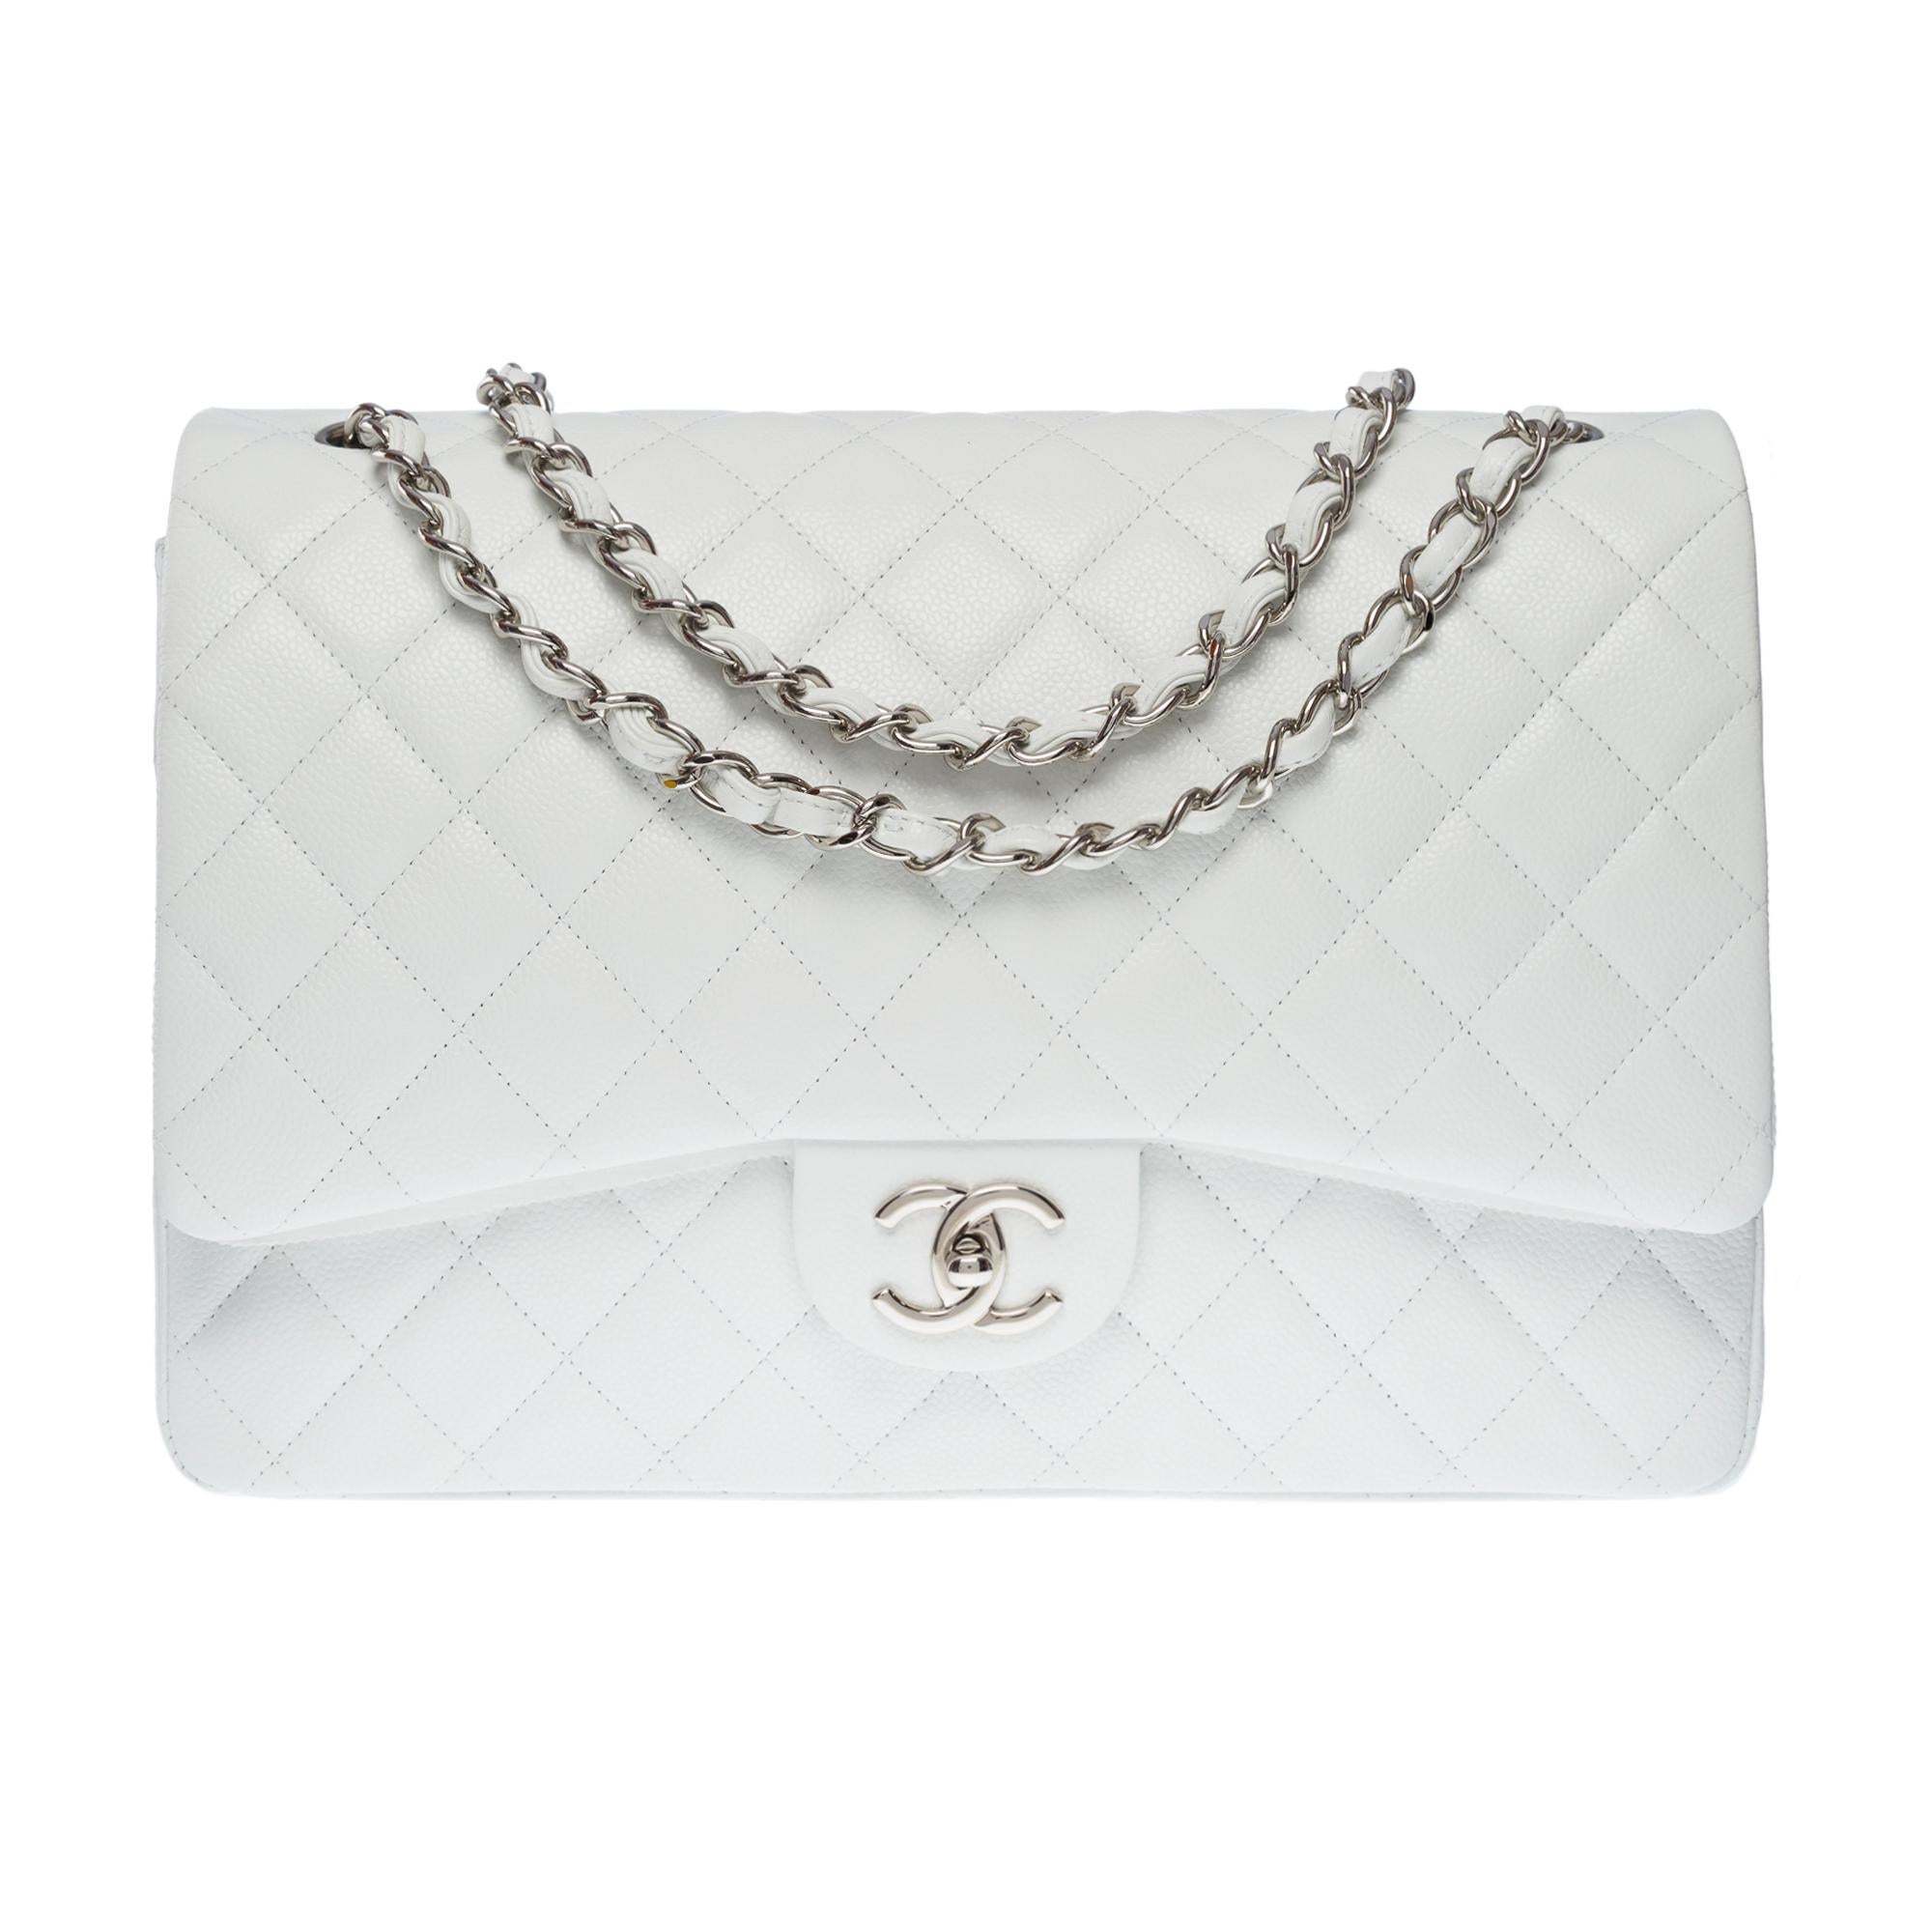 Exceptional Chanel Timeless Maxi Jumbo double flap shoulder bag in white quilted caviar leather, silver metal hardware, a silver metal chain handle interwoven with white caviar leather for a hand and shoulder

A patch pocket on the back of the